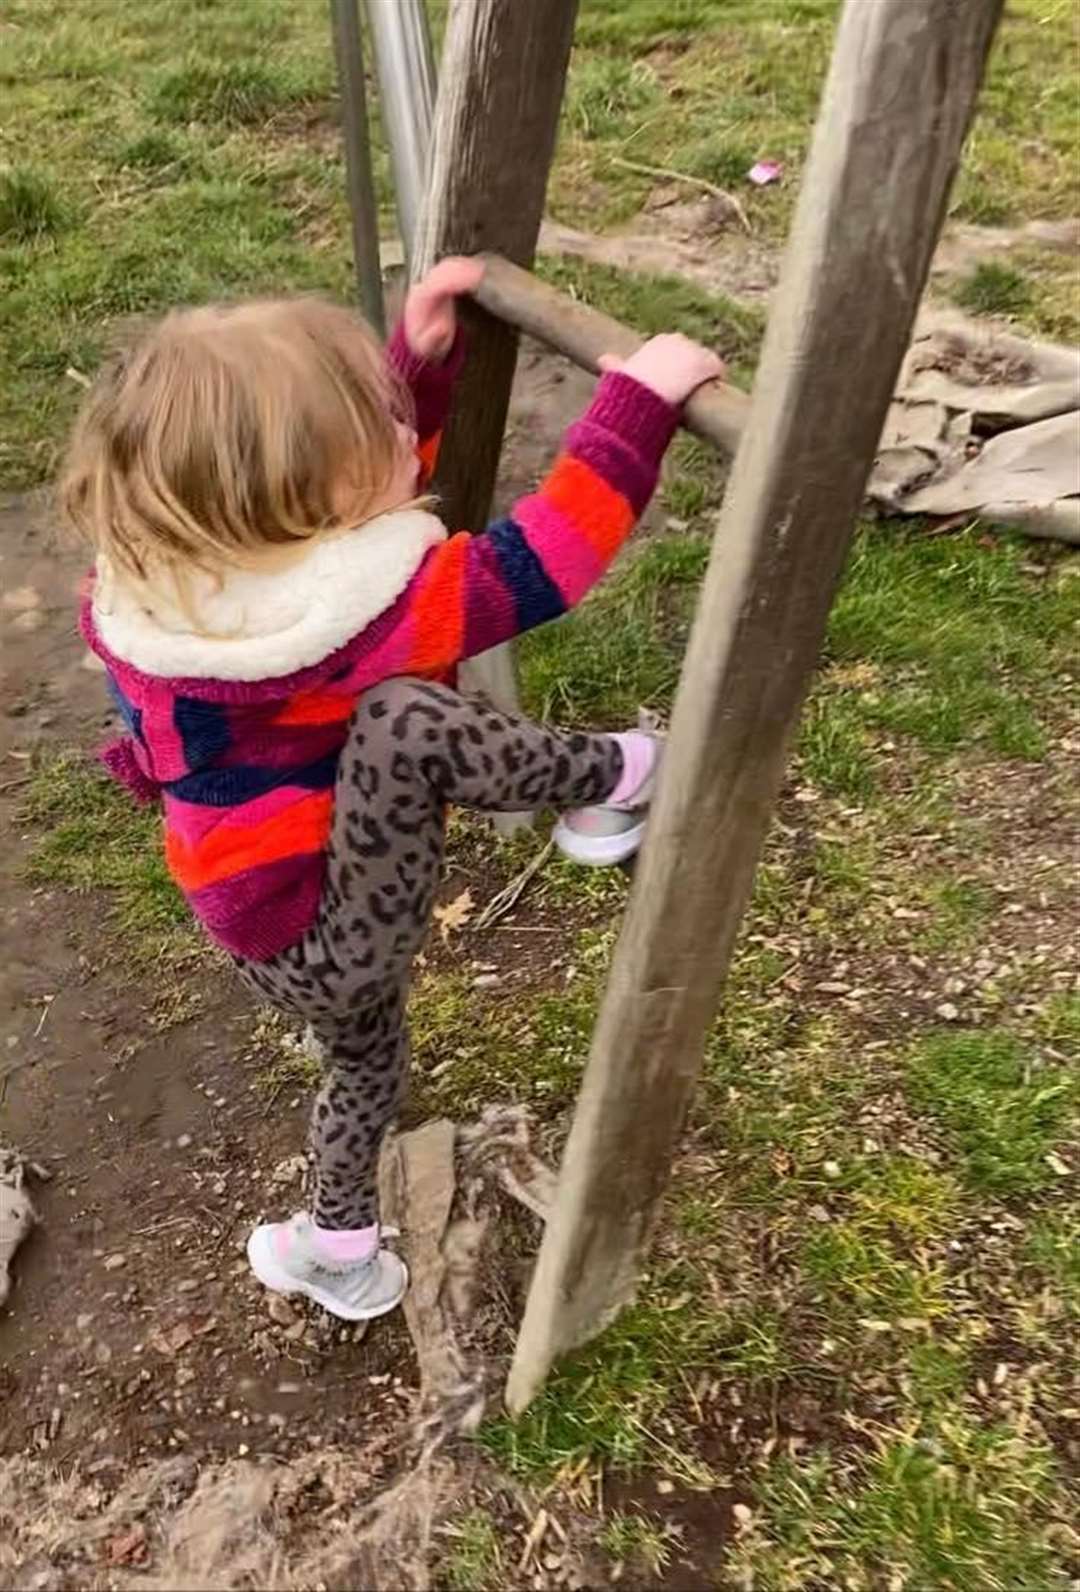 Stretching past a missing rung on the ladder on a climbing frame.